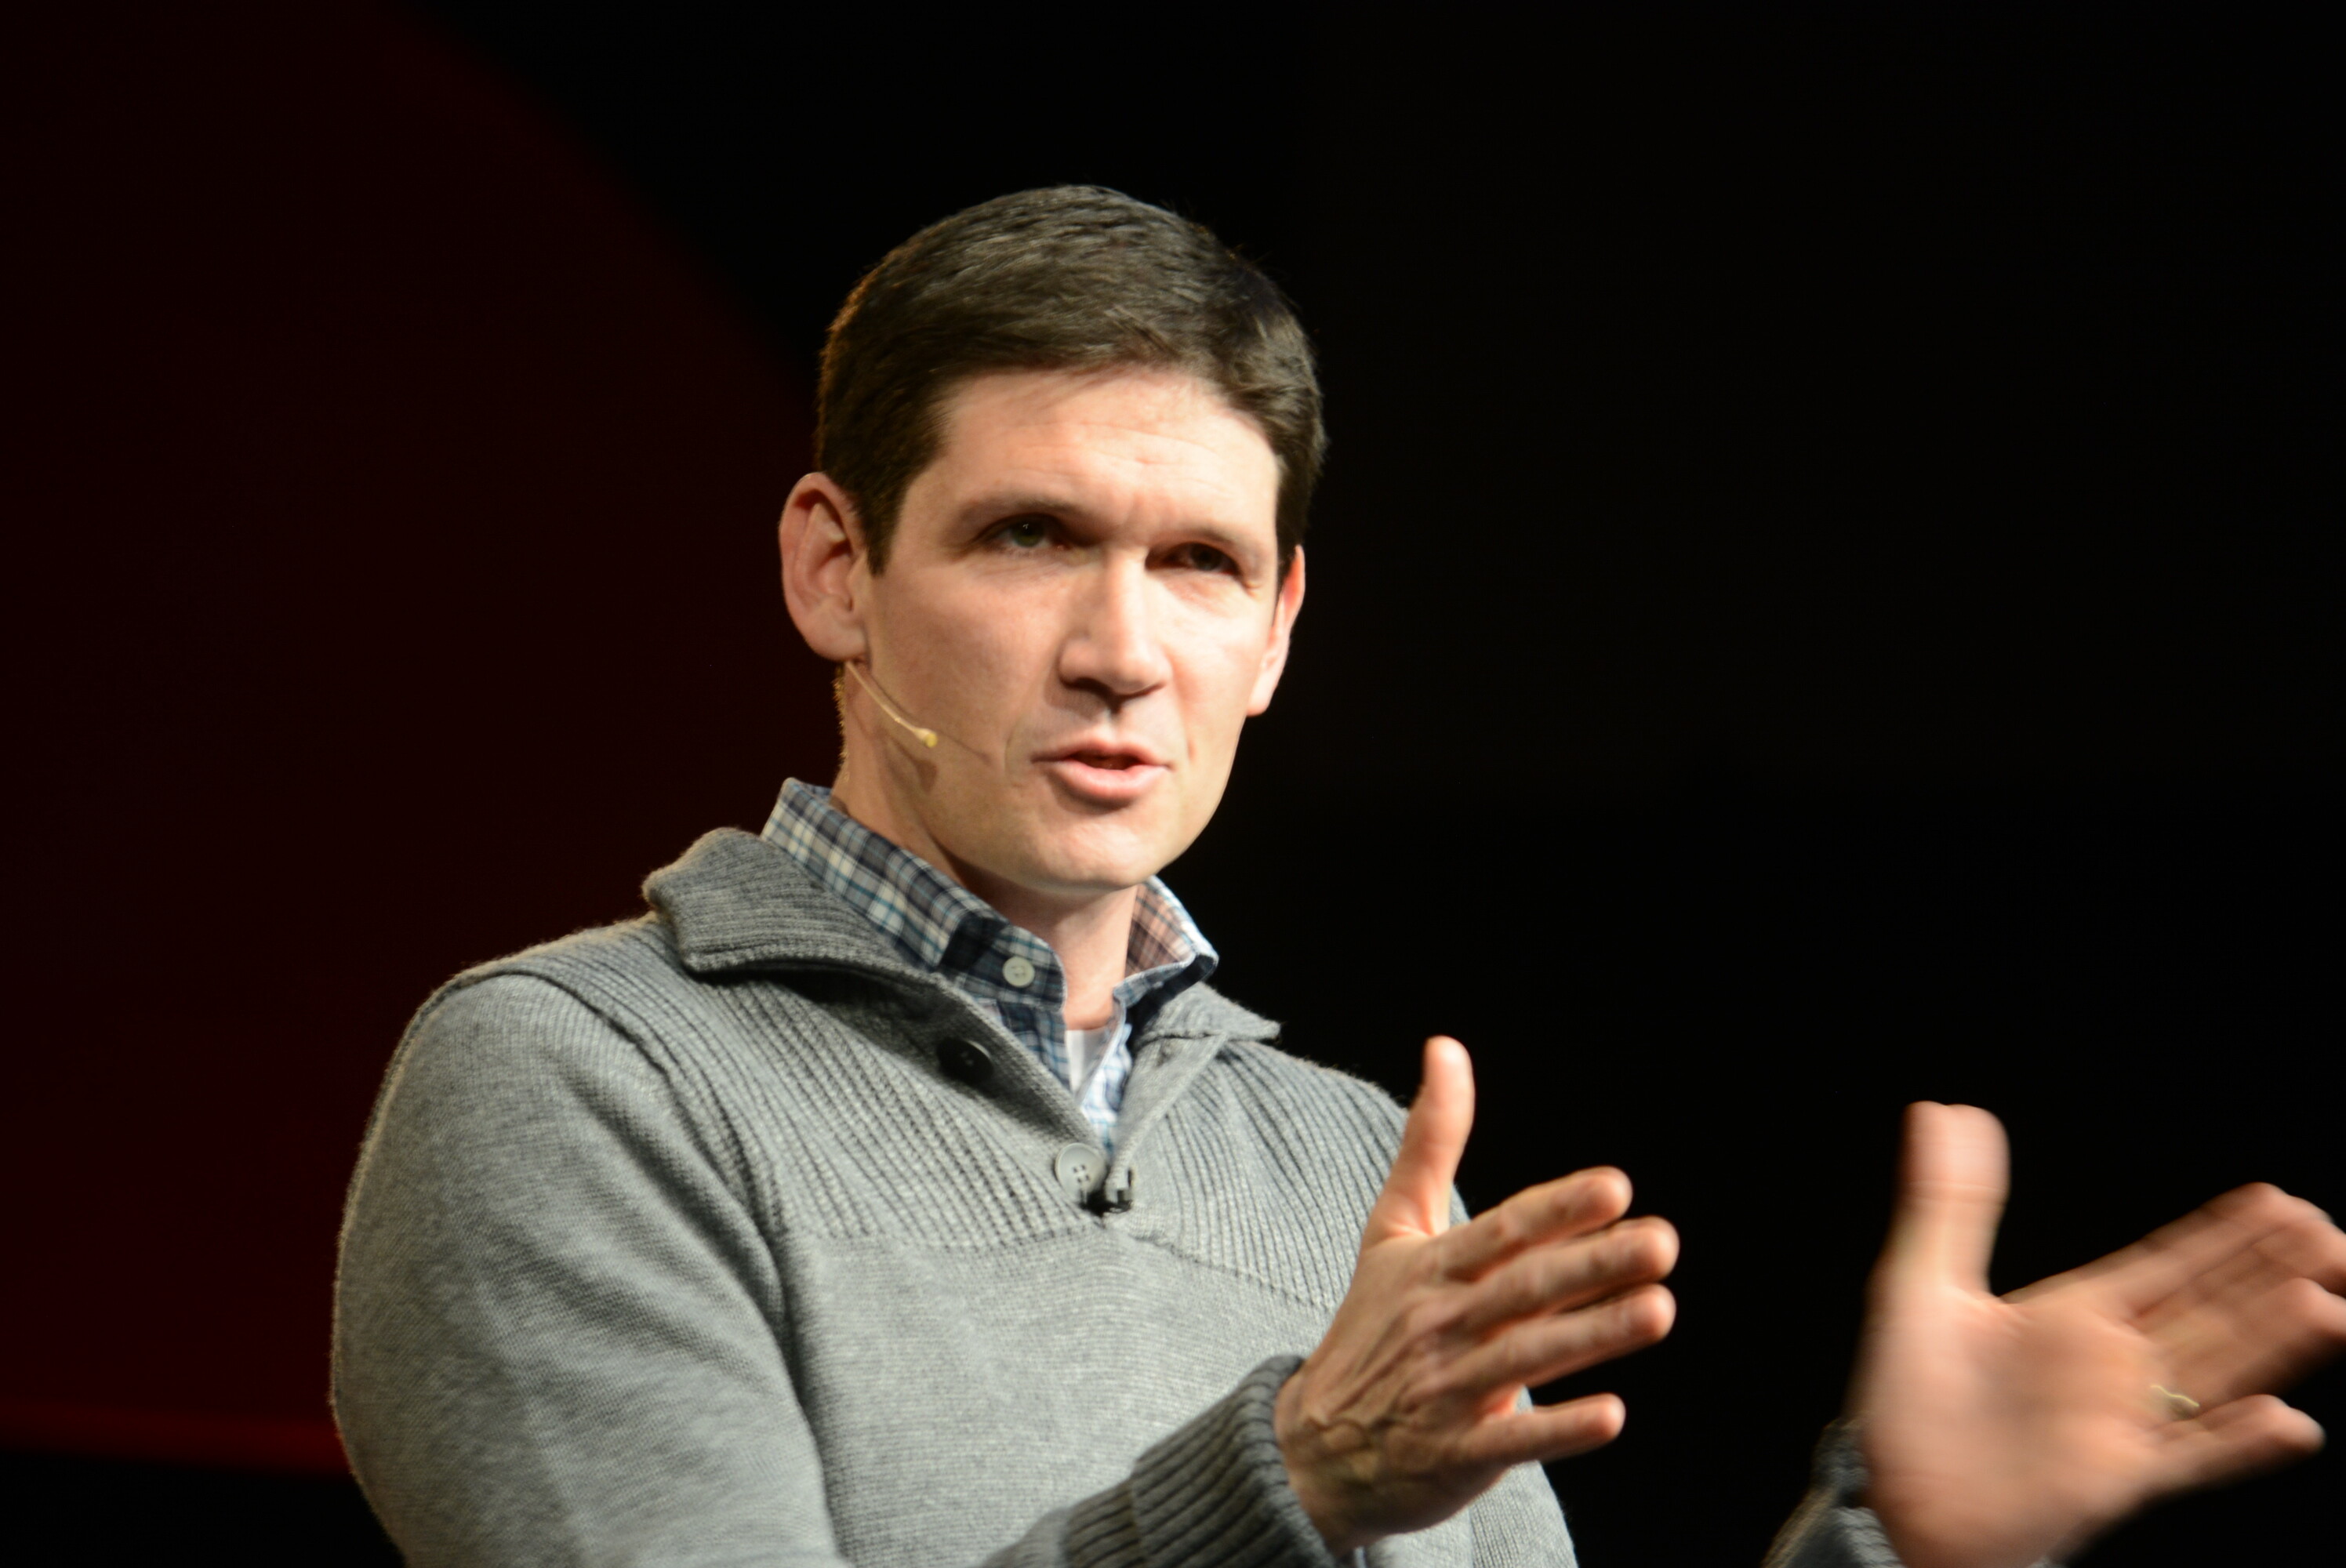 Matt Chandler pictured here talking about the relationship between recognizing sin and gratitude. Only when we acknowledge our sin can we appreciate God's grace.